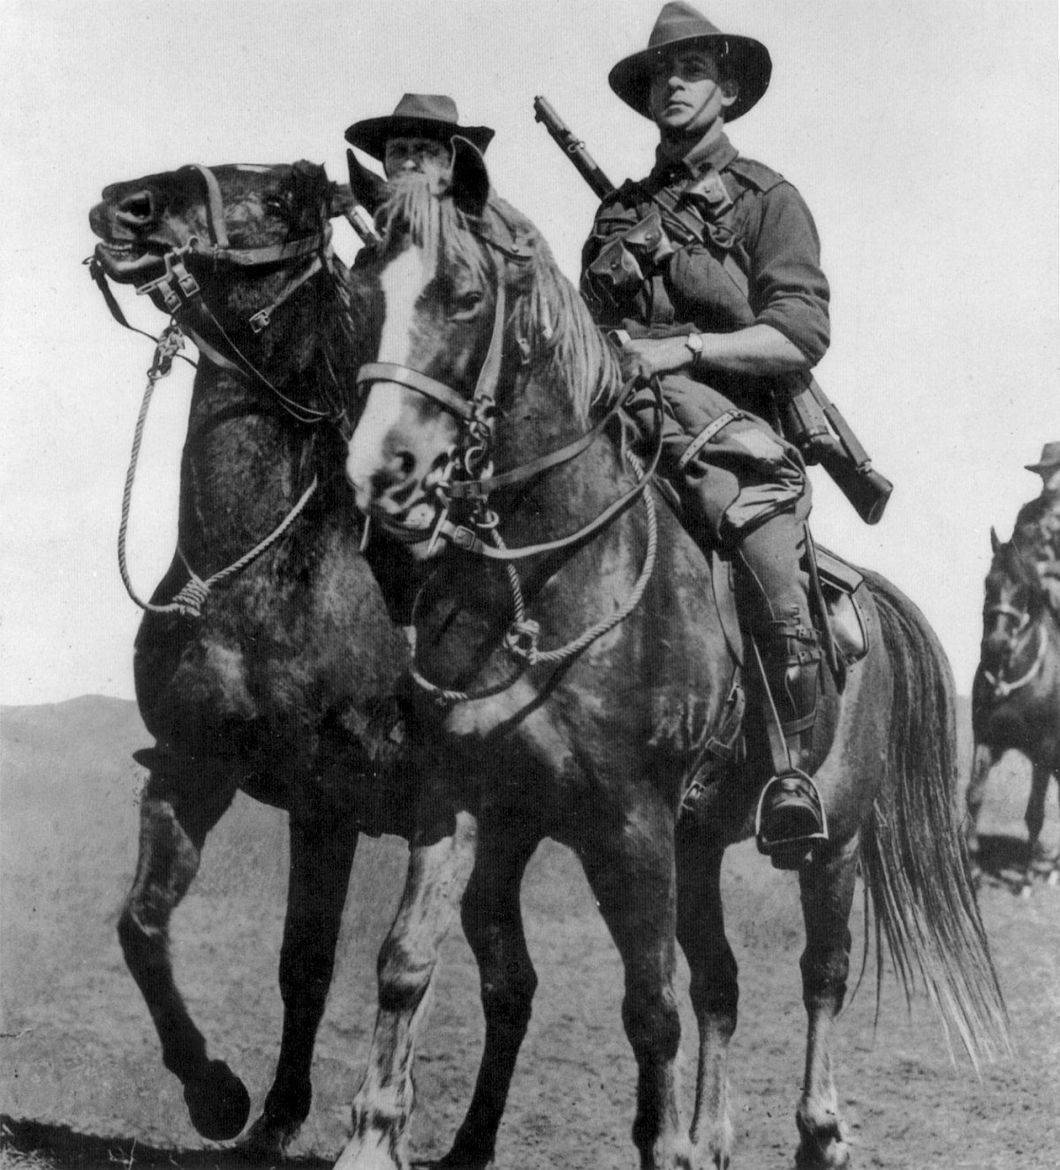 Troopers of the Australian Light Horse mounted on their 'Waler' horse, brought from Australia. These amazing horses in operations could carry up to 500lb and go without water for 40-60 hours.